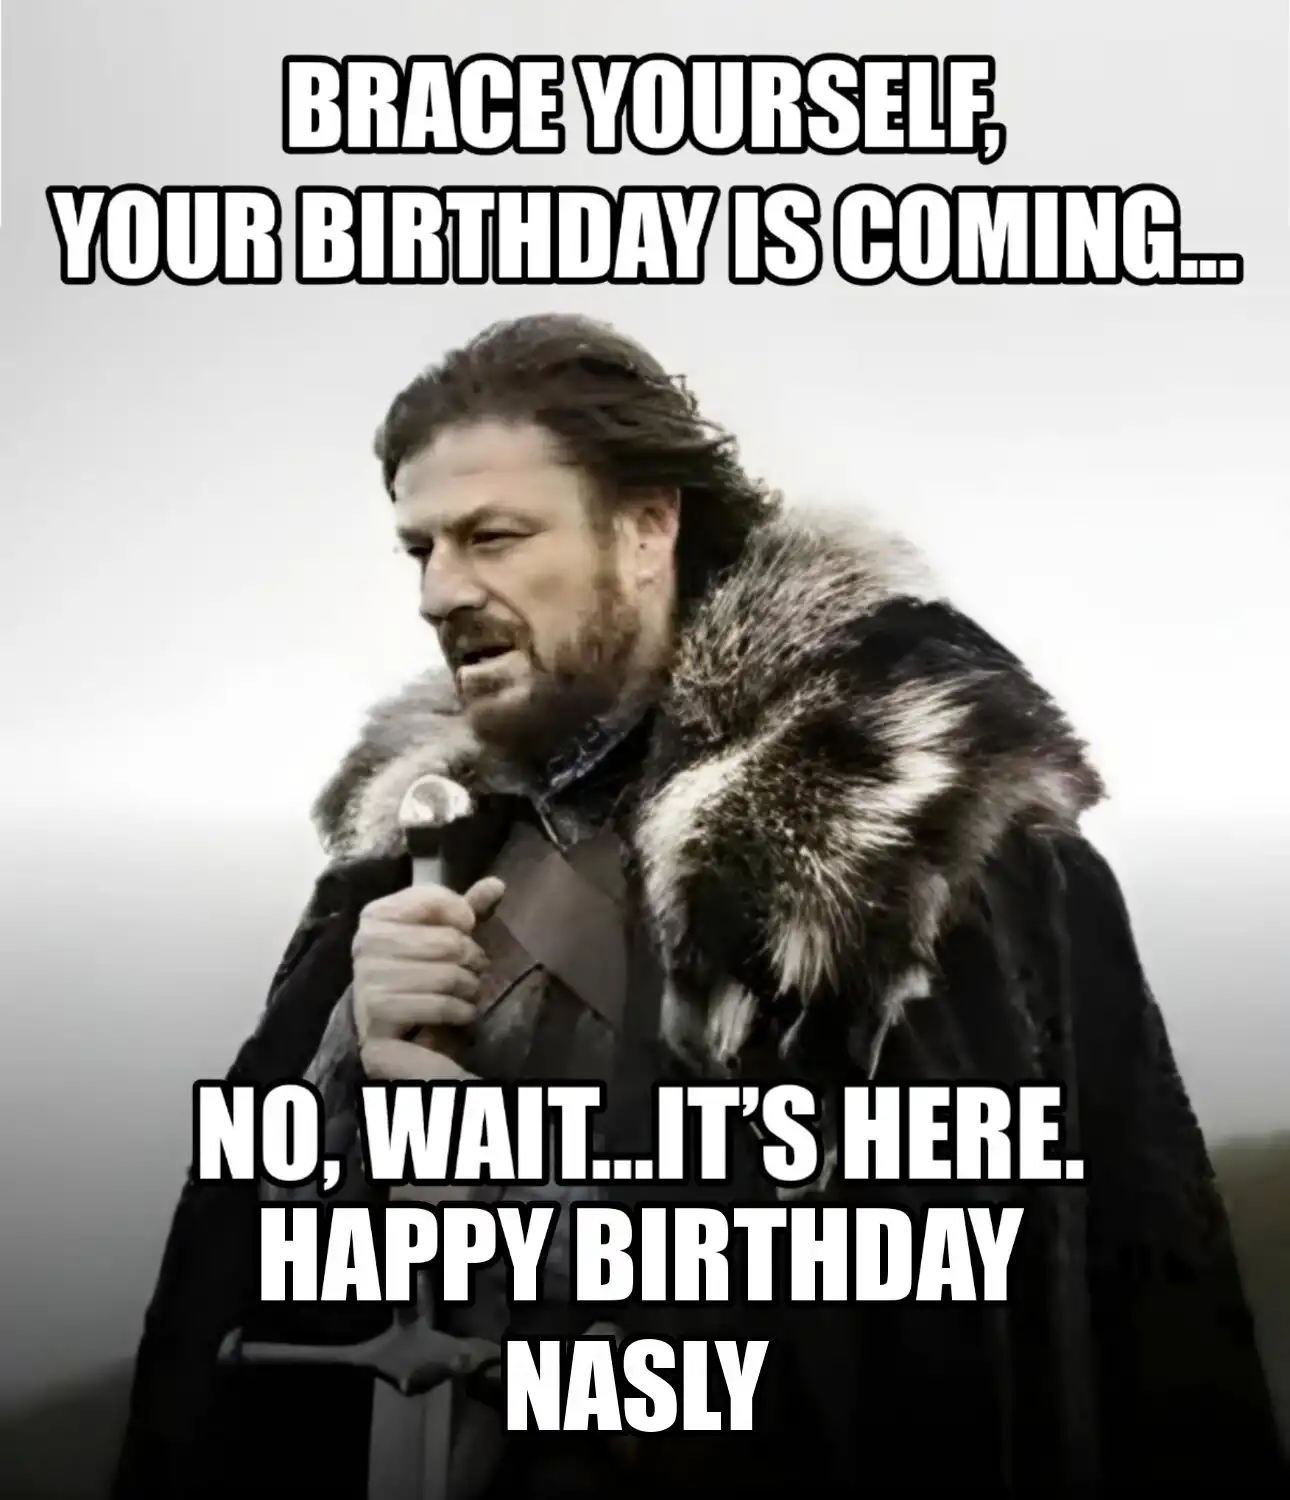 Happy Birthday Nasly Brace Yourself Your Birthday Is Coming Meme